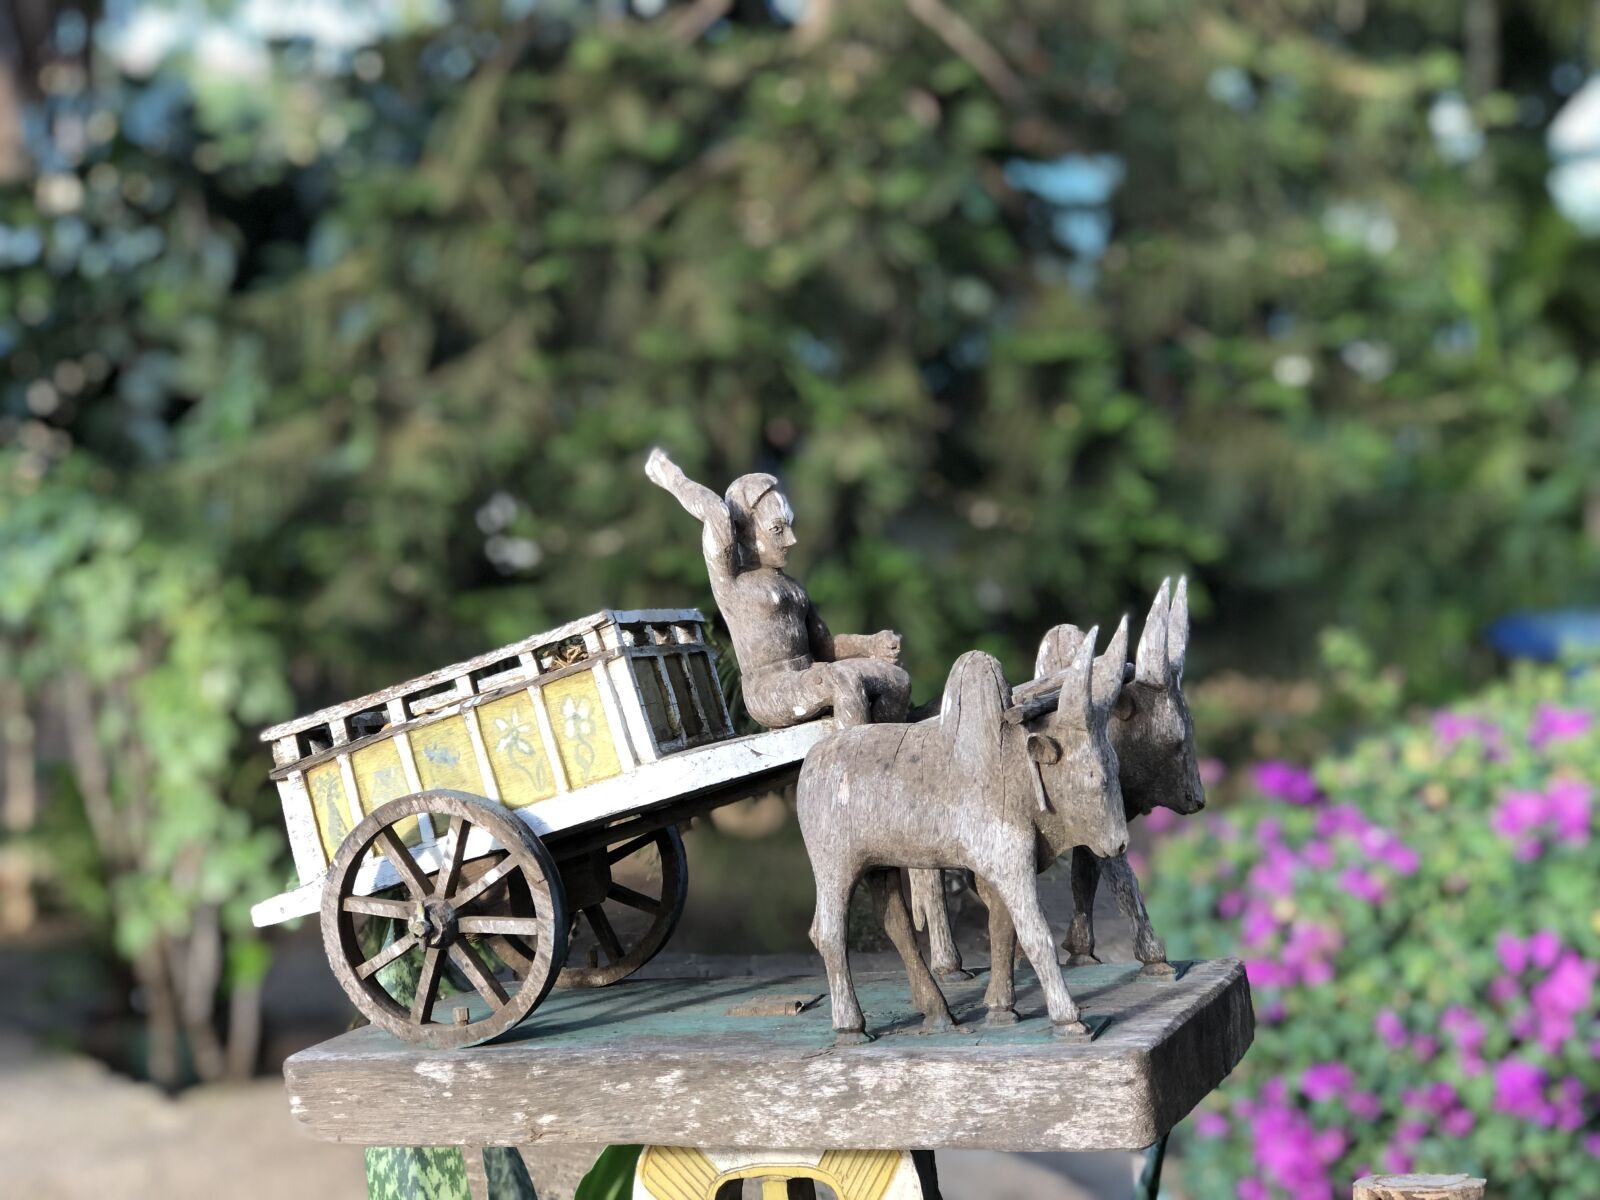 Apple iPhone 8 Plus + iPhone 8 Plus back dual camera 6.6mm f/2.8 sample photo. Statuette, madagascar, characters photography